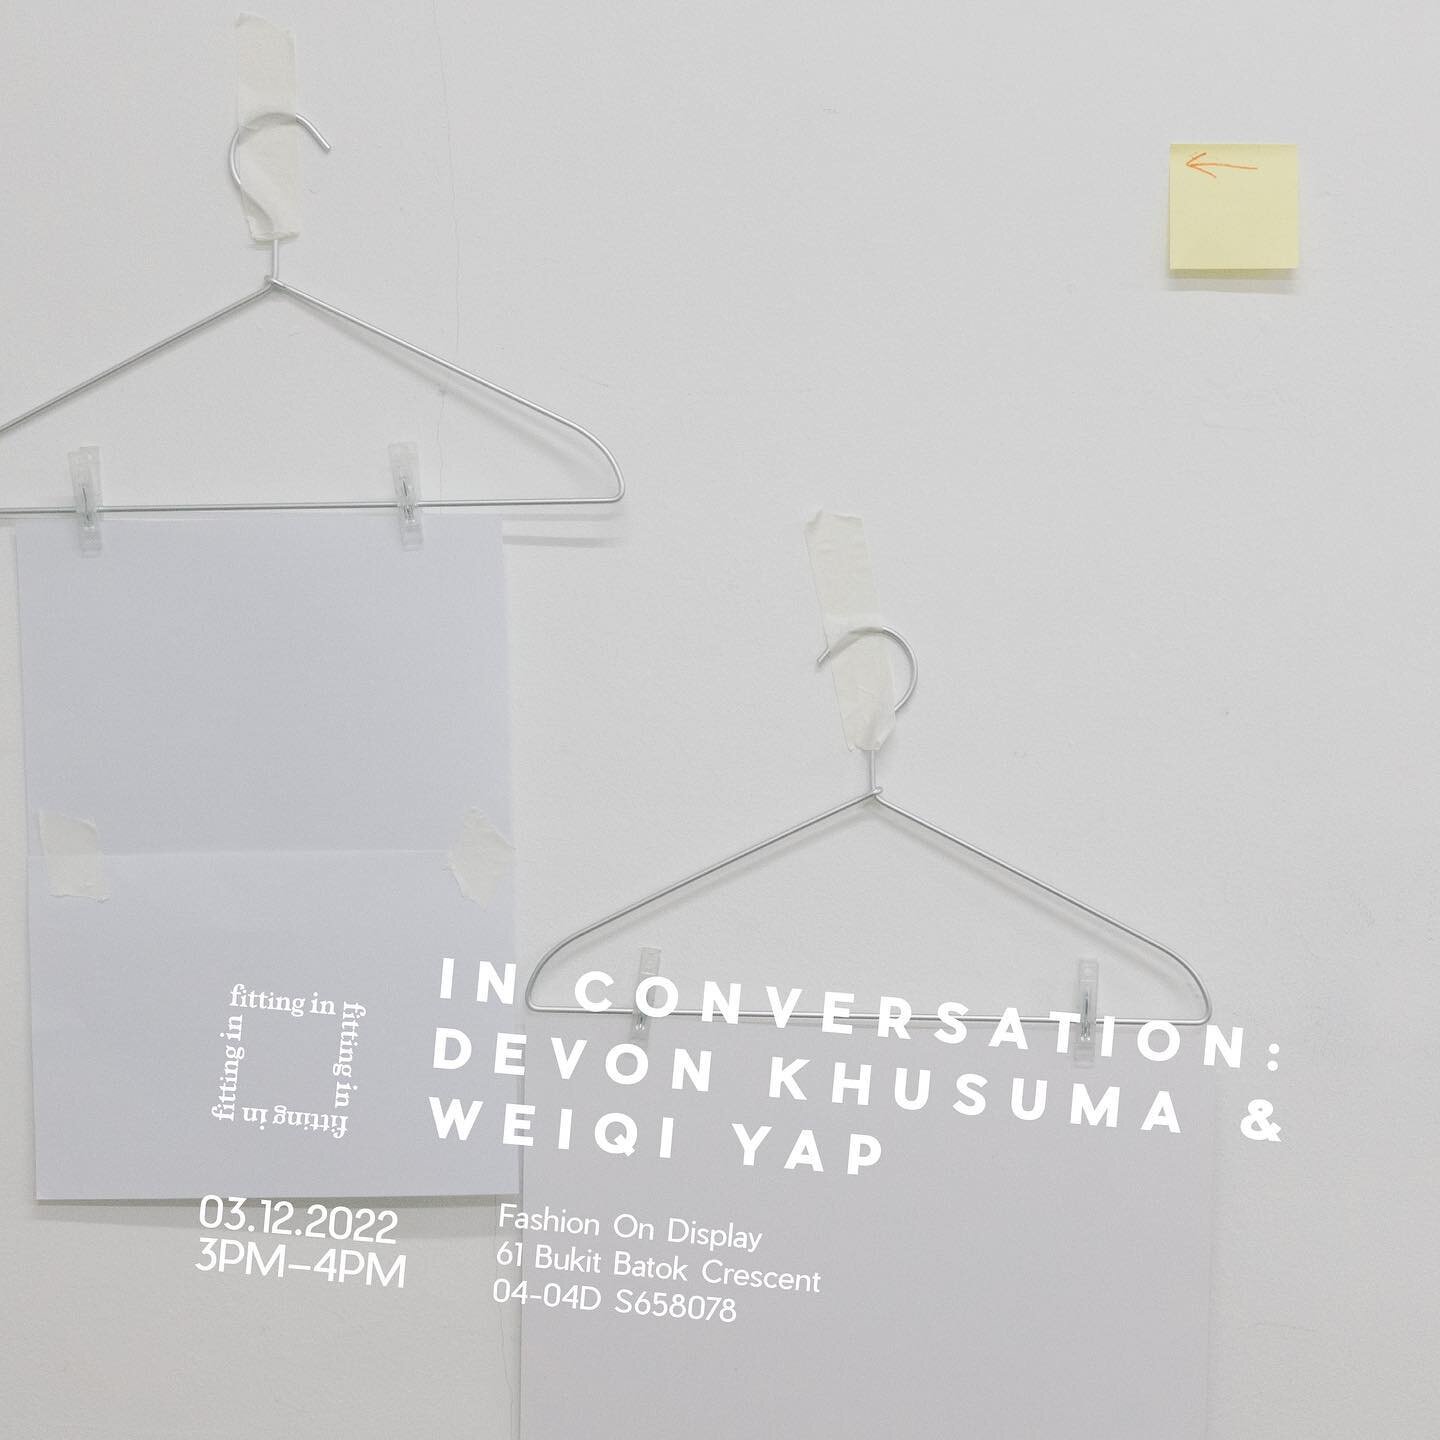 In Conversation: Devon Khusuma &amp; Weiqi Yap
Saturday 3 December, 3PM - 4PM

Next Saturday, join artist and fashion photographer Devon Khusuma (@ini.depon) and curator Weiqi Yap (@weiqi.yap) for a conversation and sharing on the behind-the-scenes p